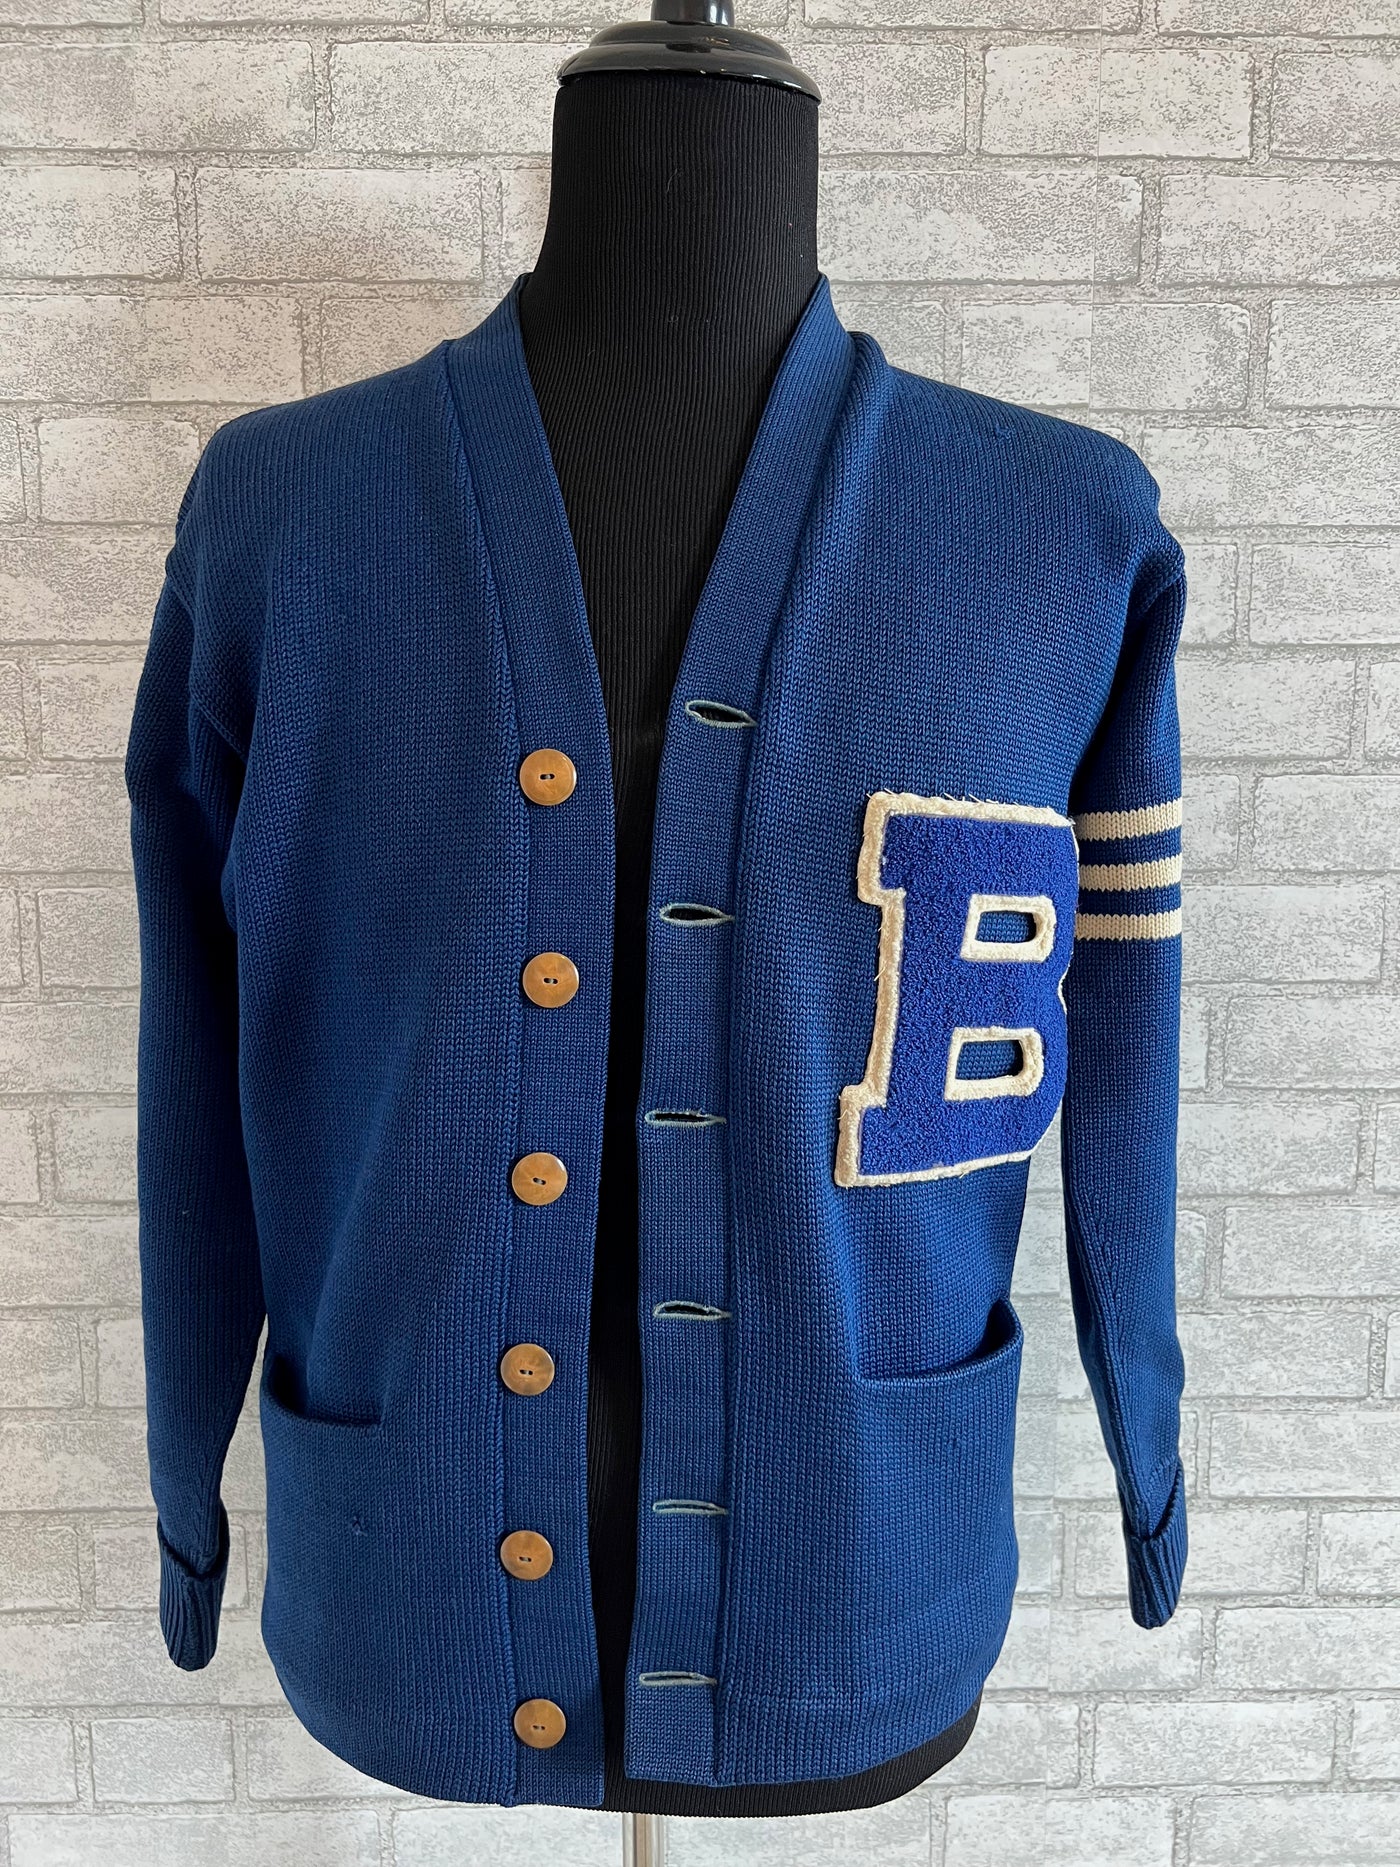 Vintage Johns Knit 50's 60's Cardigan Sweater